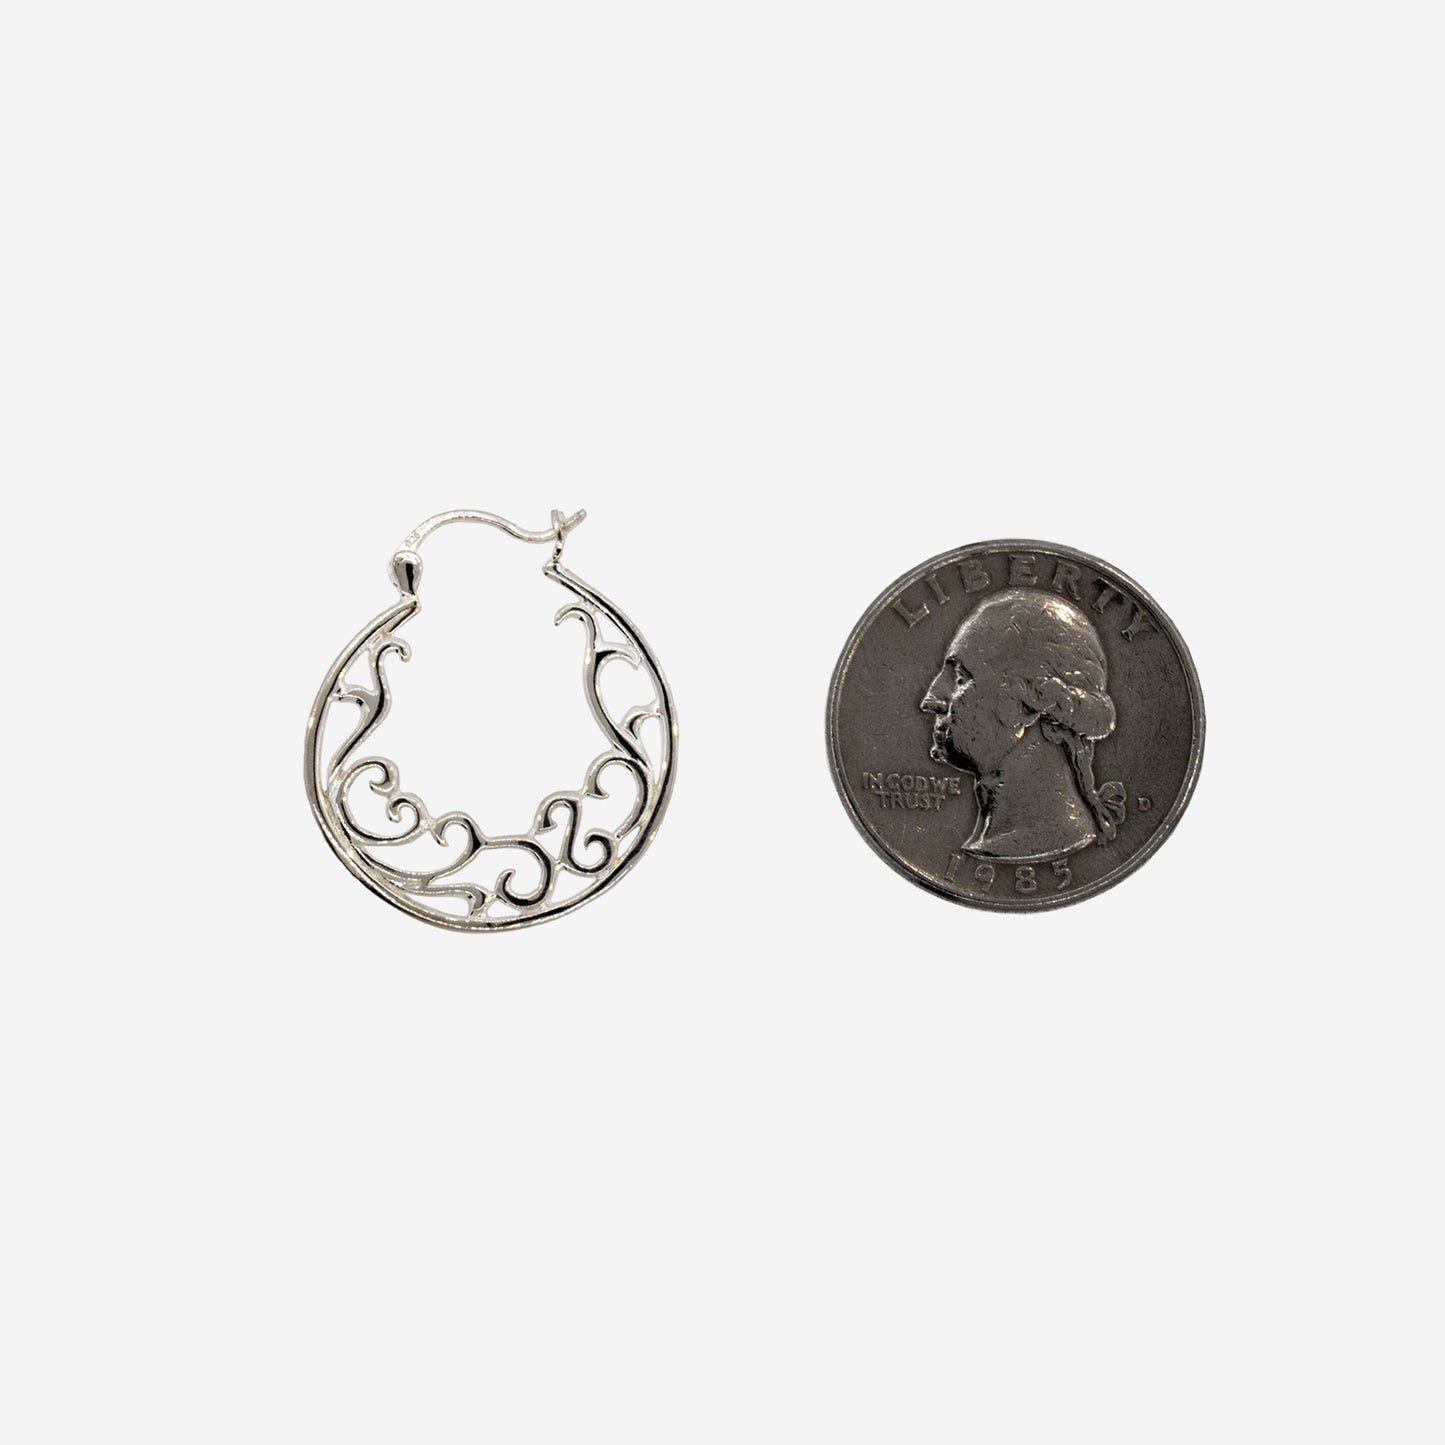 A pair of Super Silver Open Filigree Hinge Hoop earrings, perfect for everyday wear.